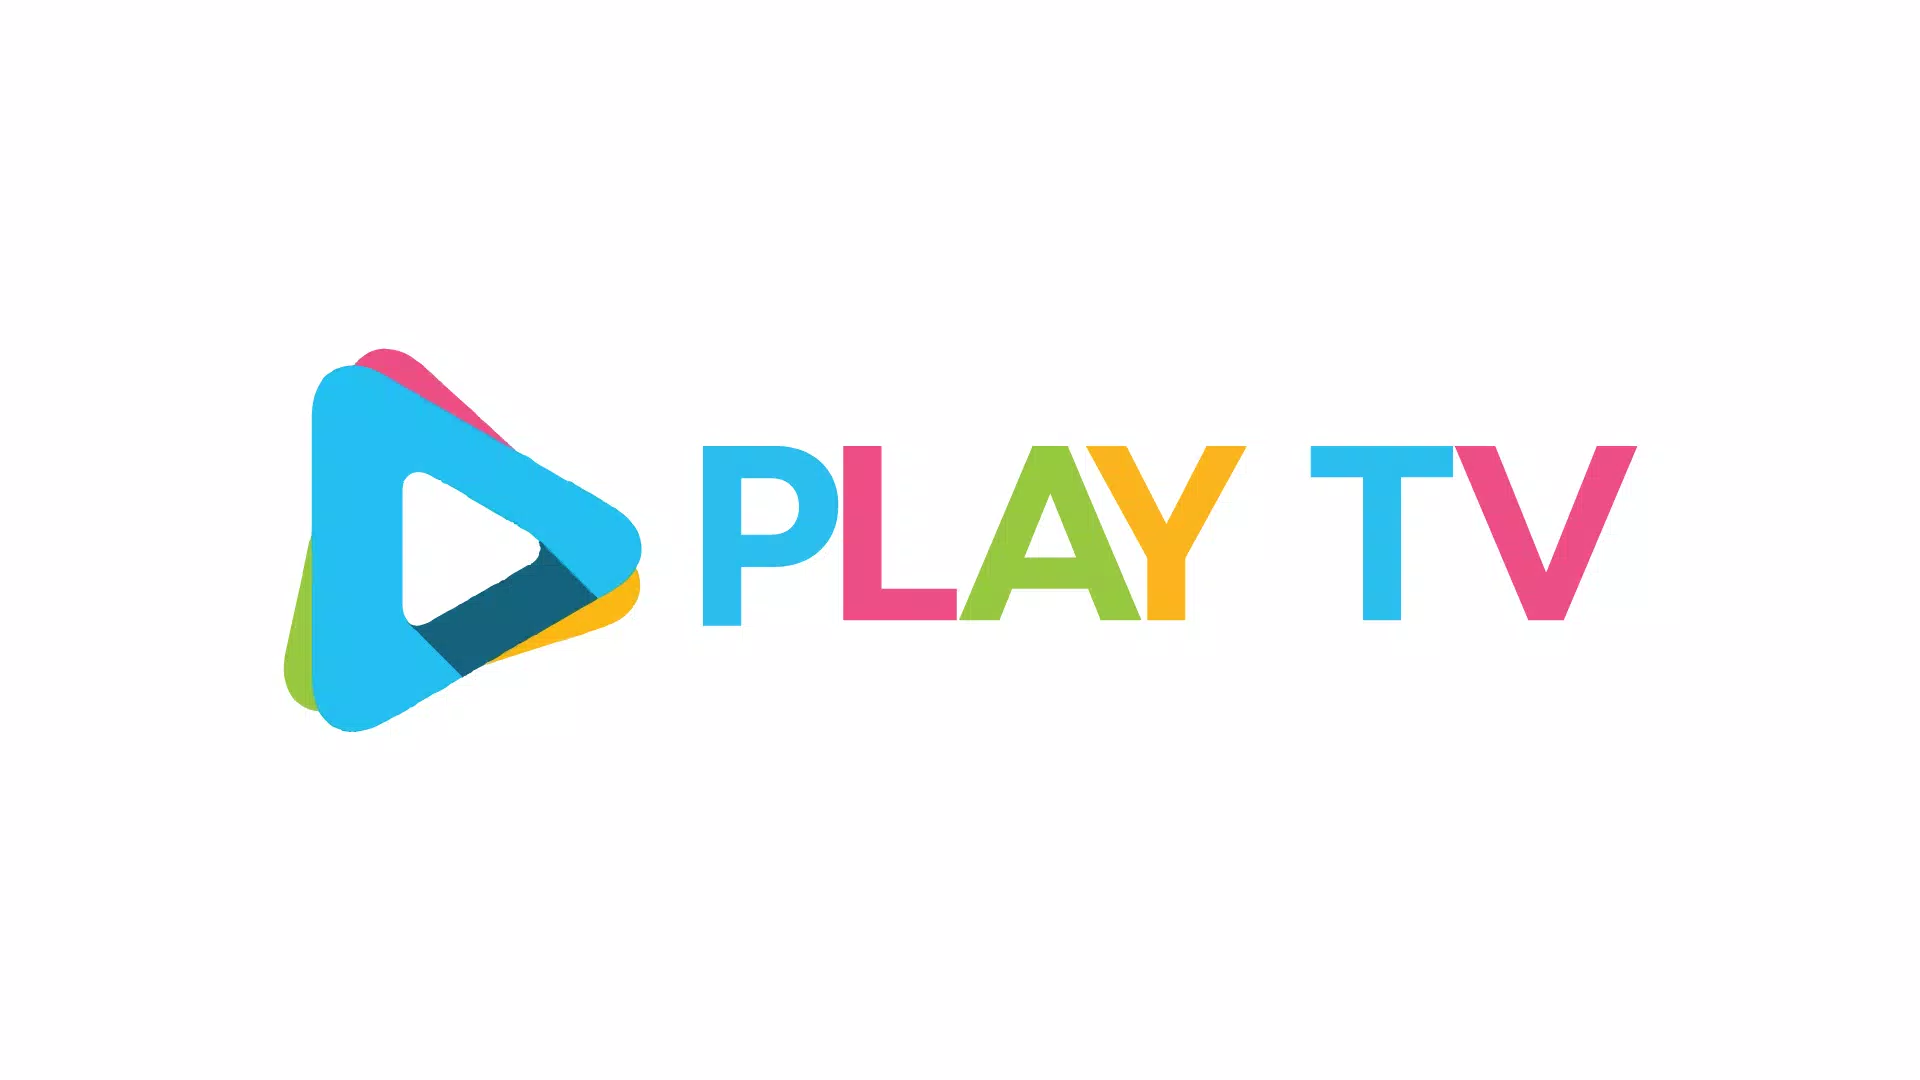 Press Play Tv APK for Android Download